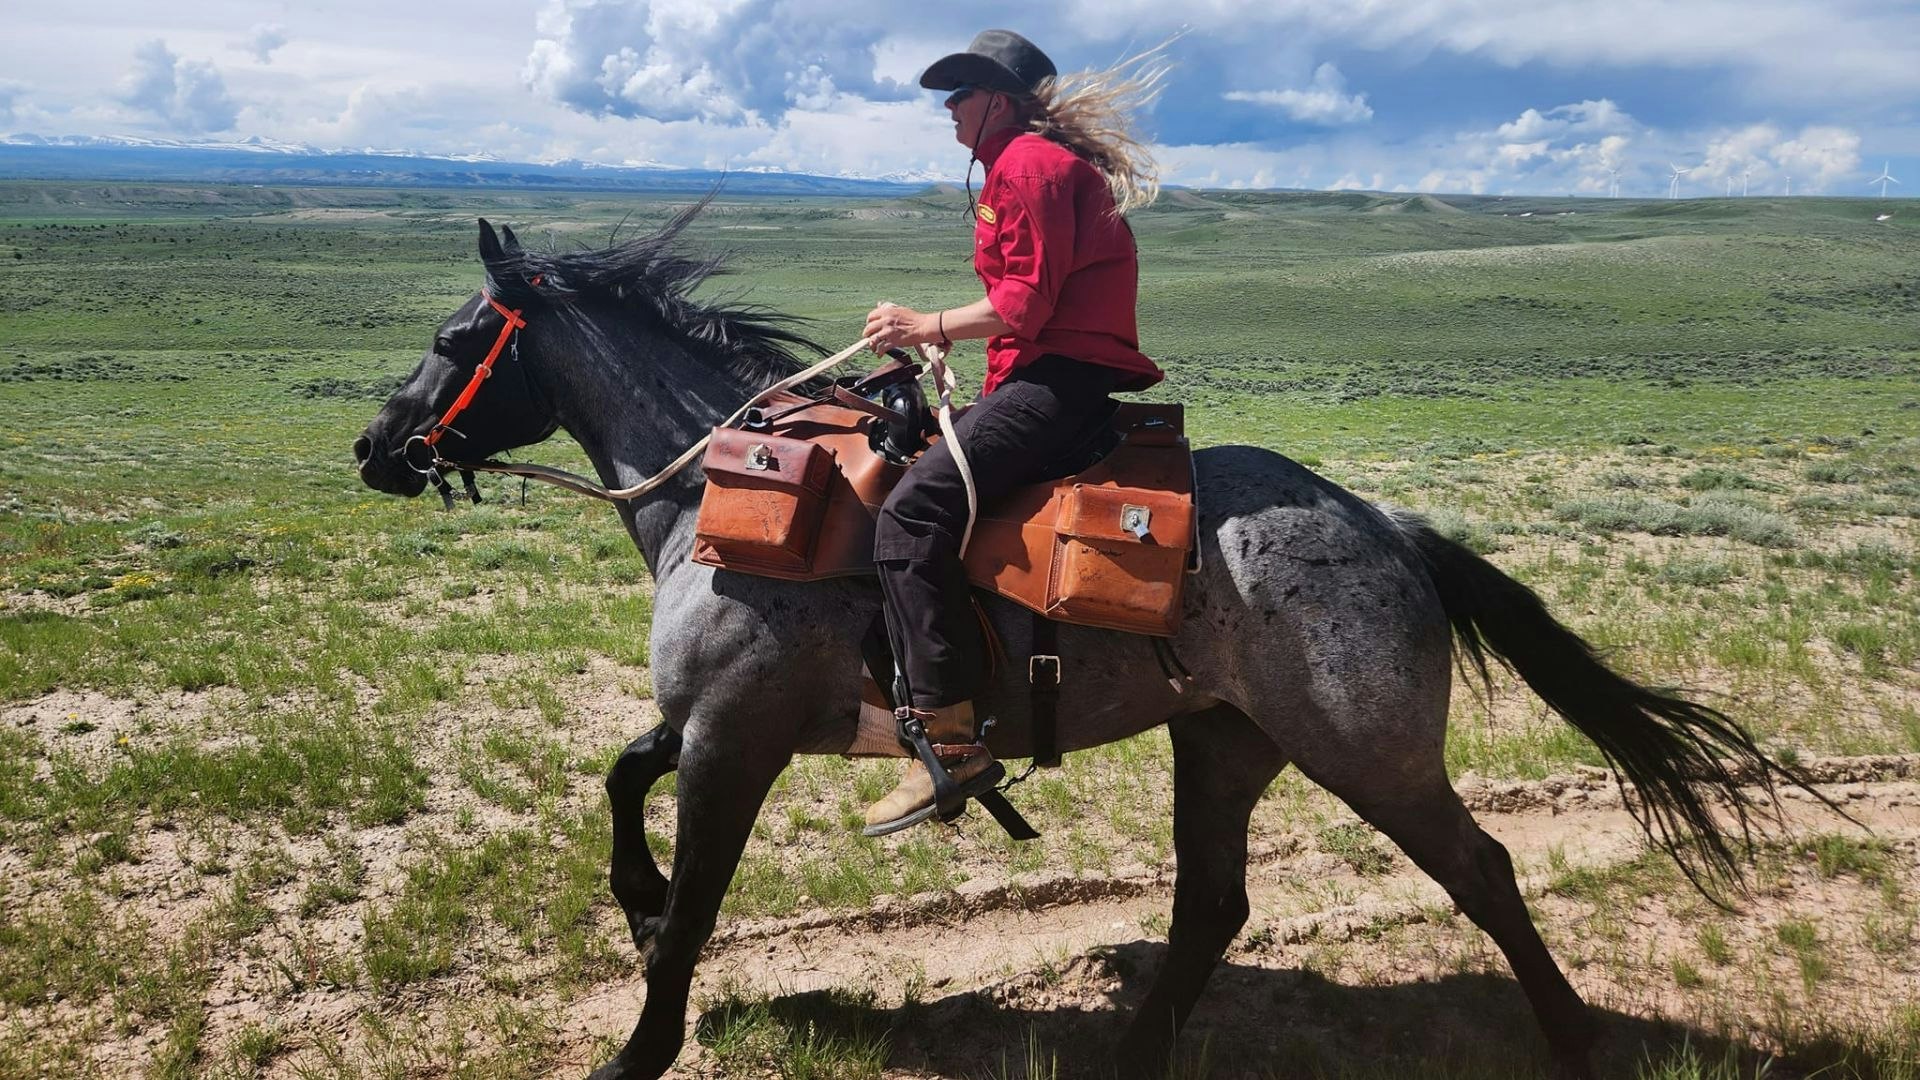 People are sharing photos of the Pony Express Re-Ride on the Wyoming Through the Lens Facebook page.